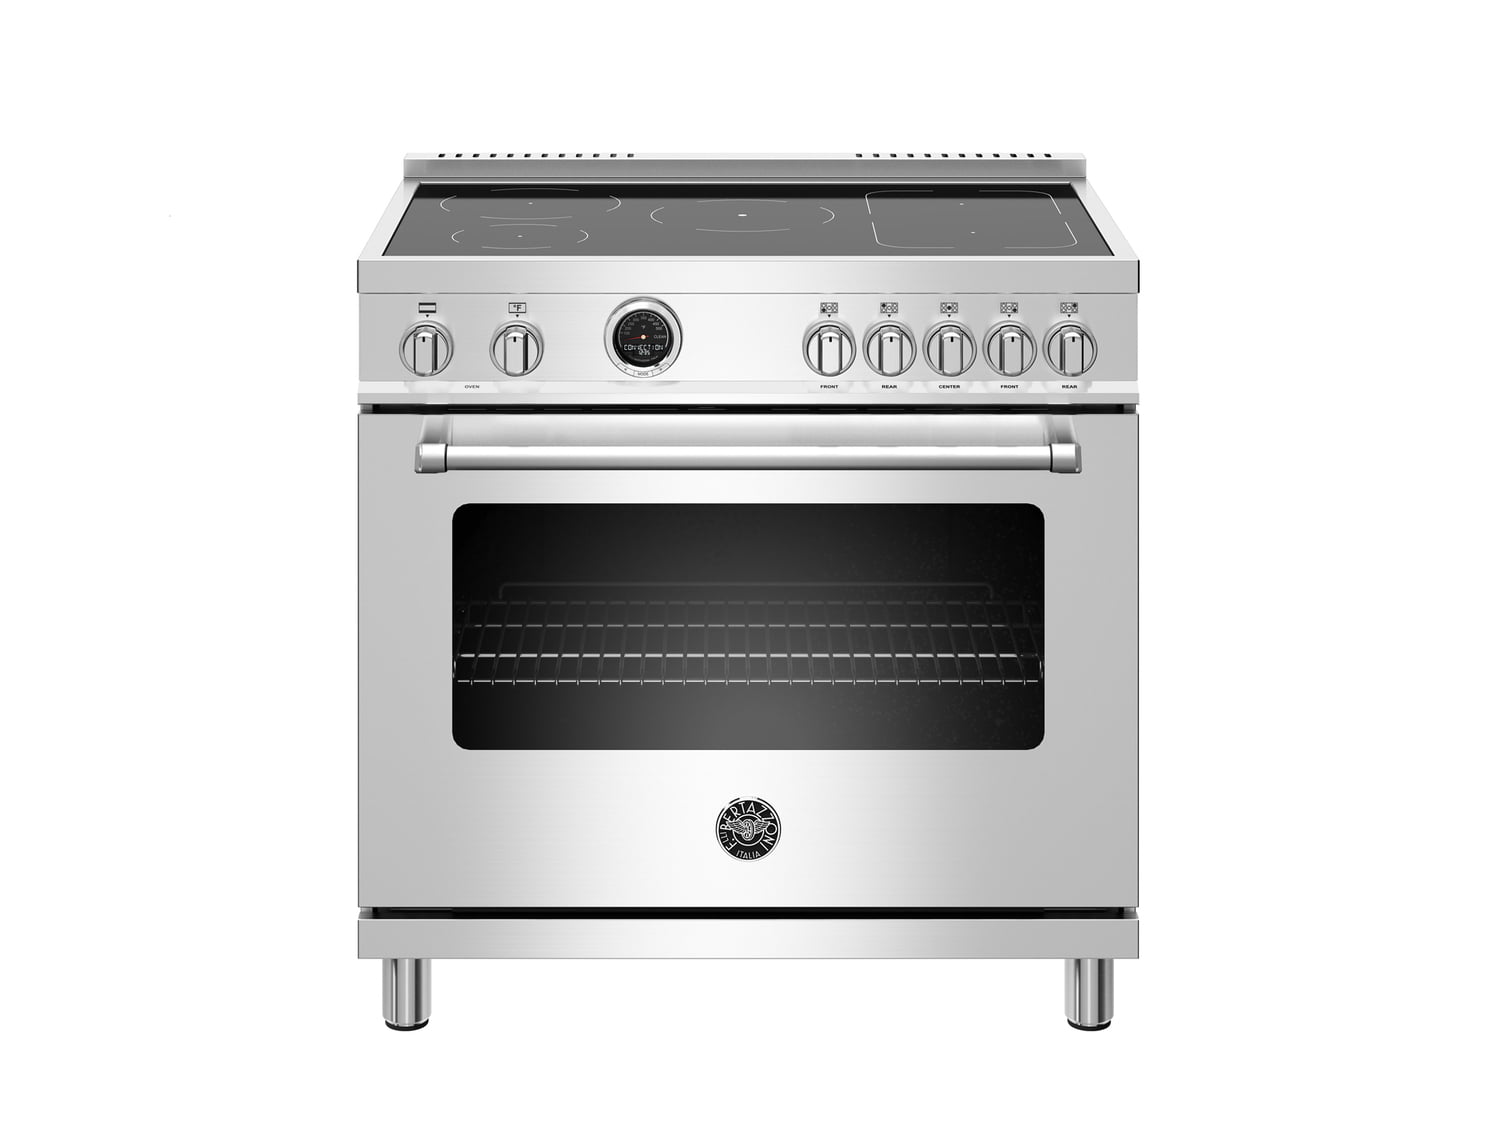 Bertazzoni MAST365INSXT 36 Inch Induction Range, 5 Heating Zones, Electric Self-Clean Oven Stainless Steel